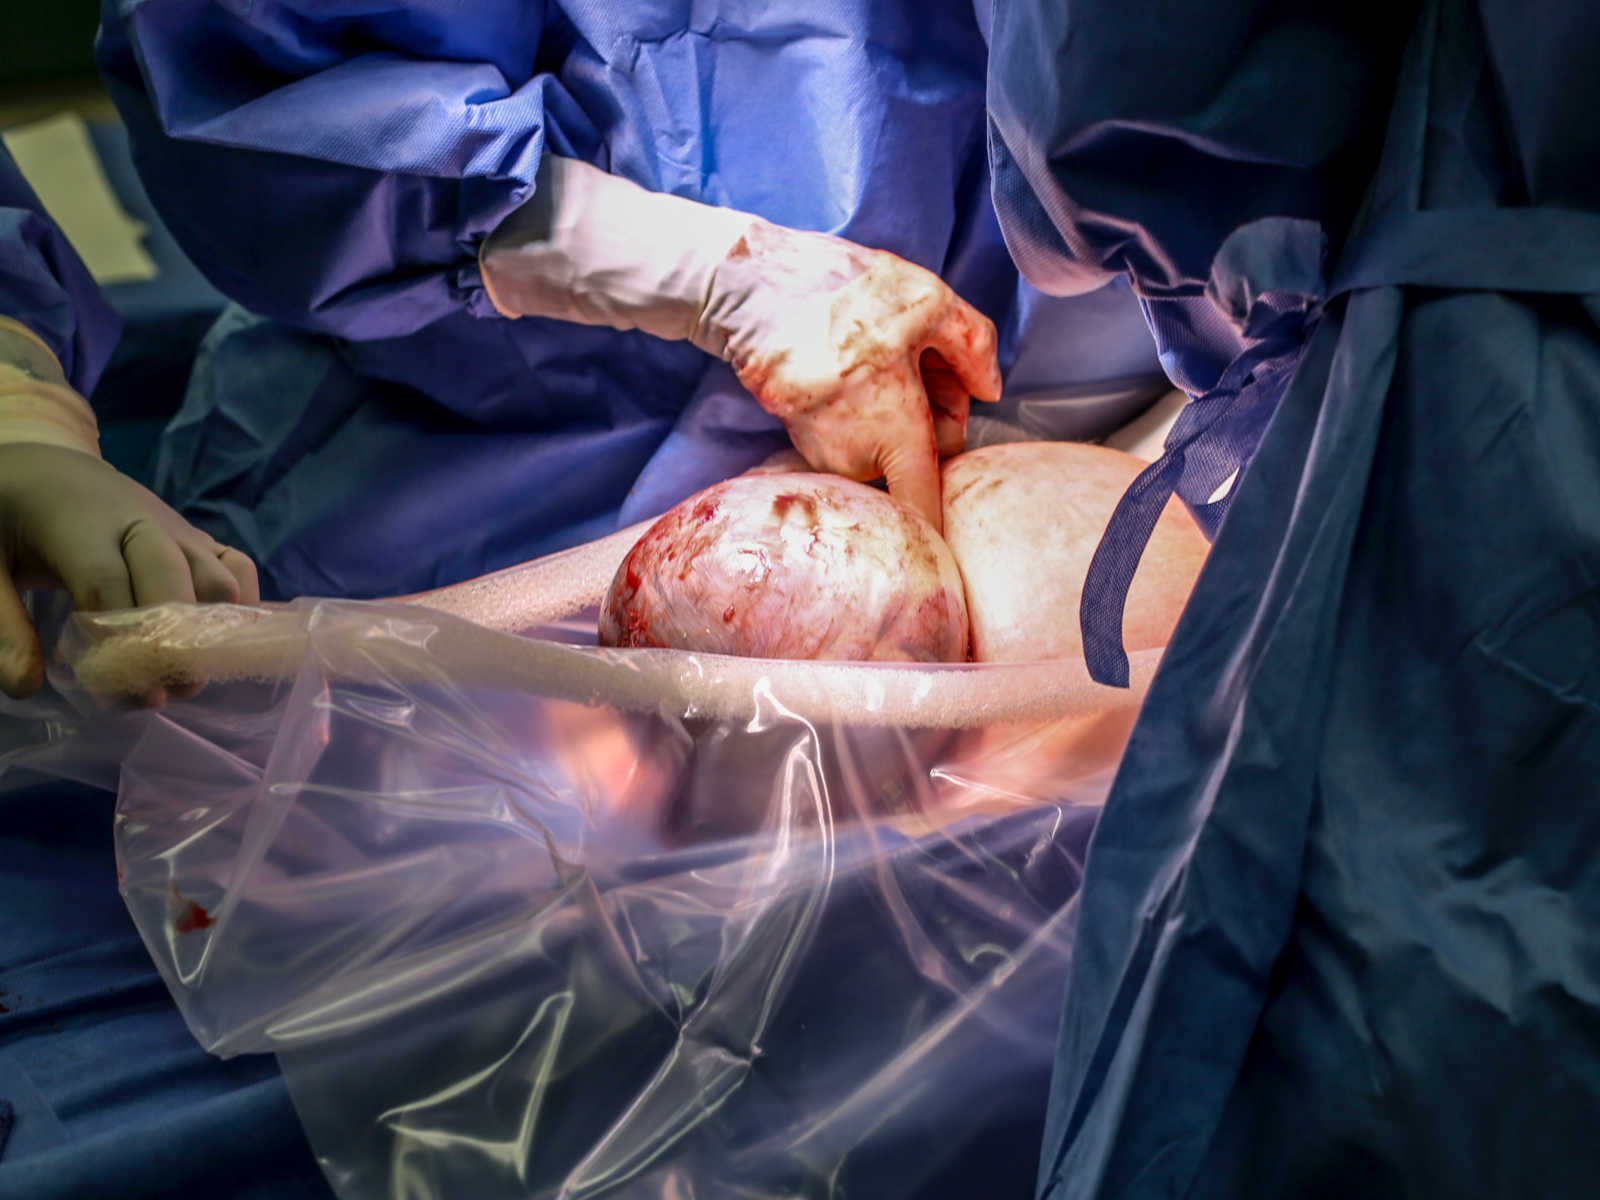 OBGYN touching newborn whose head is still covered in amniotic sac